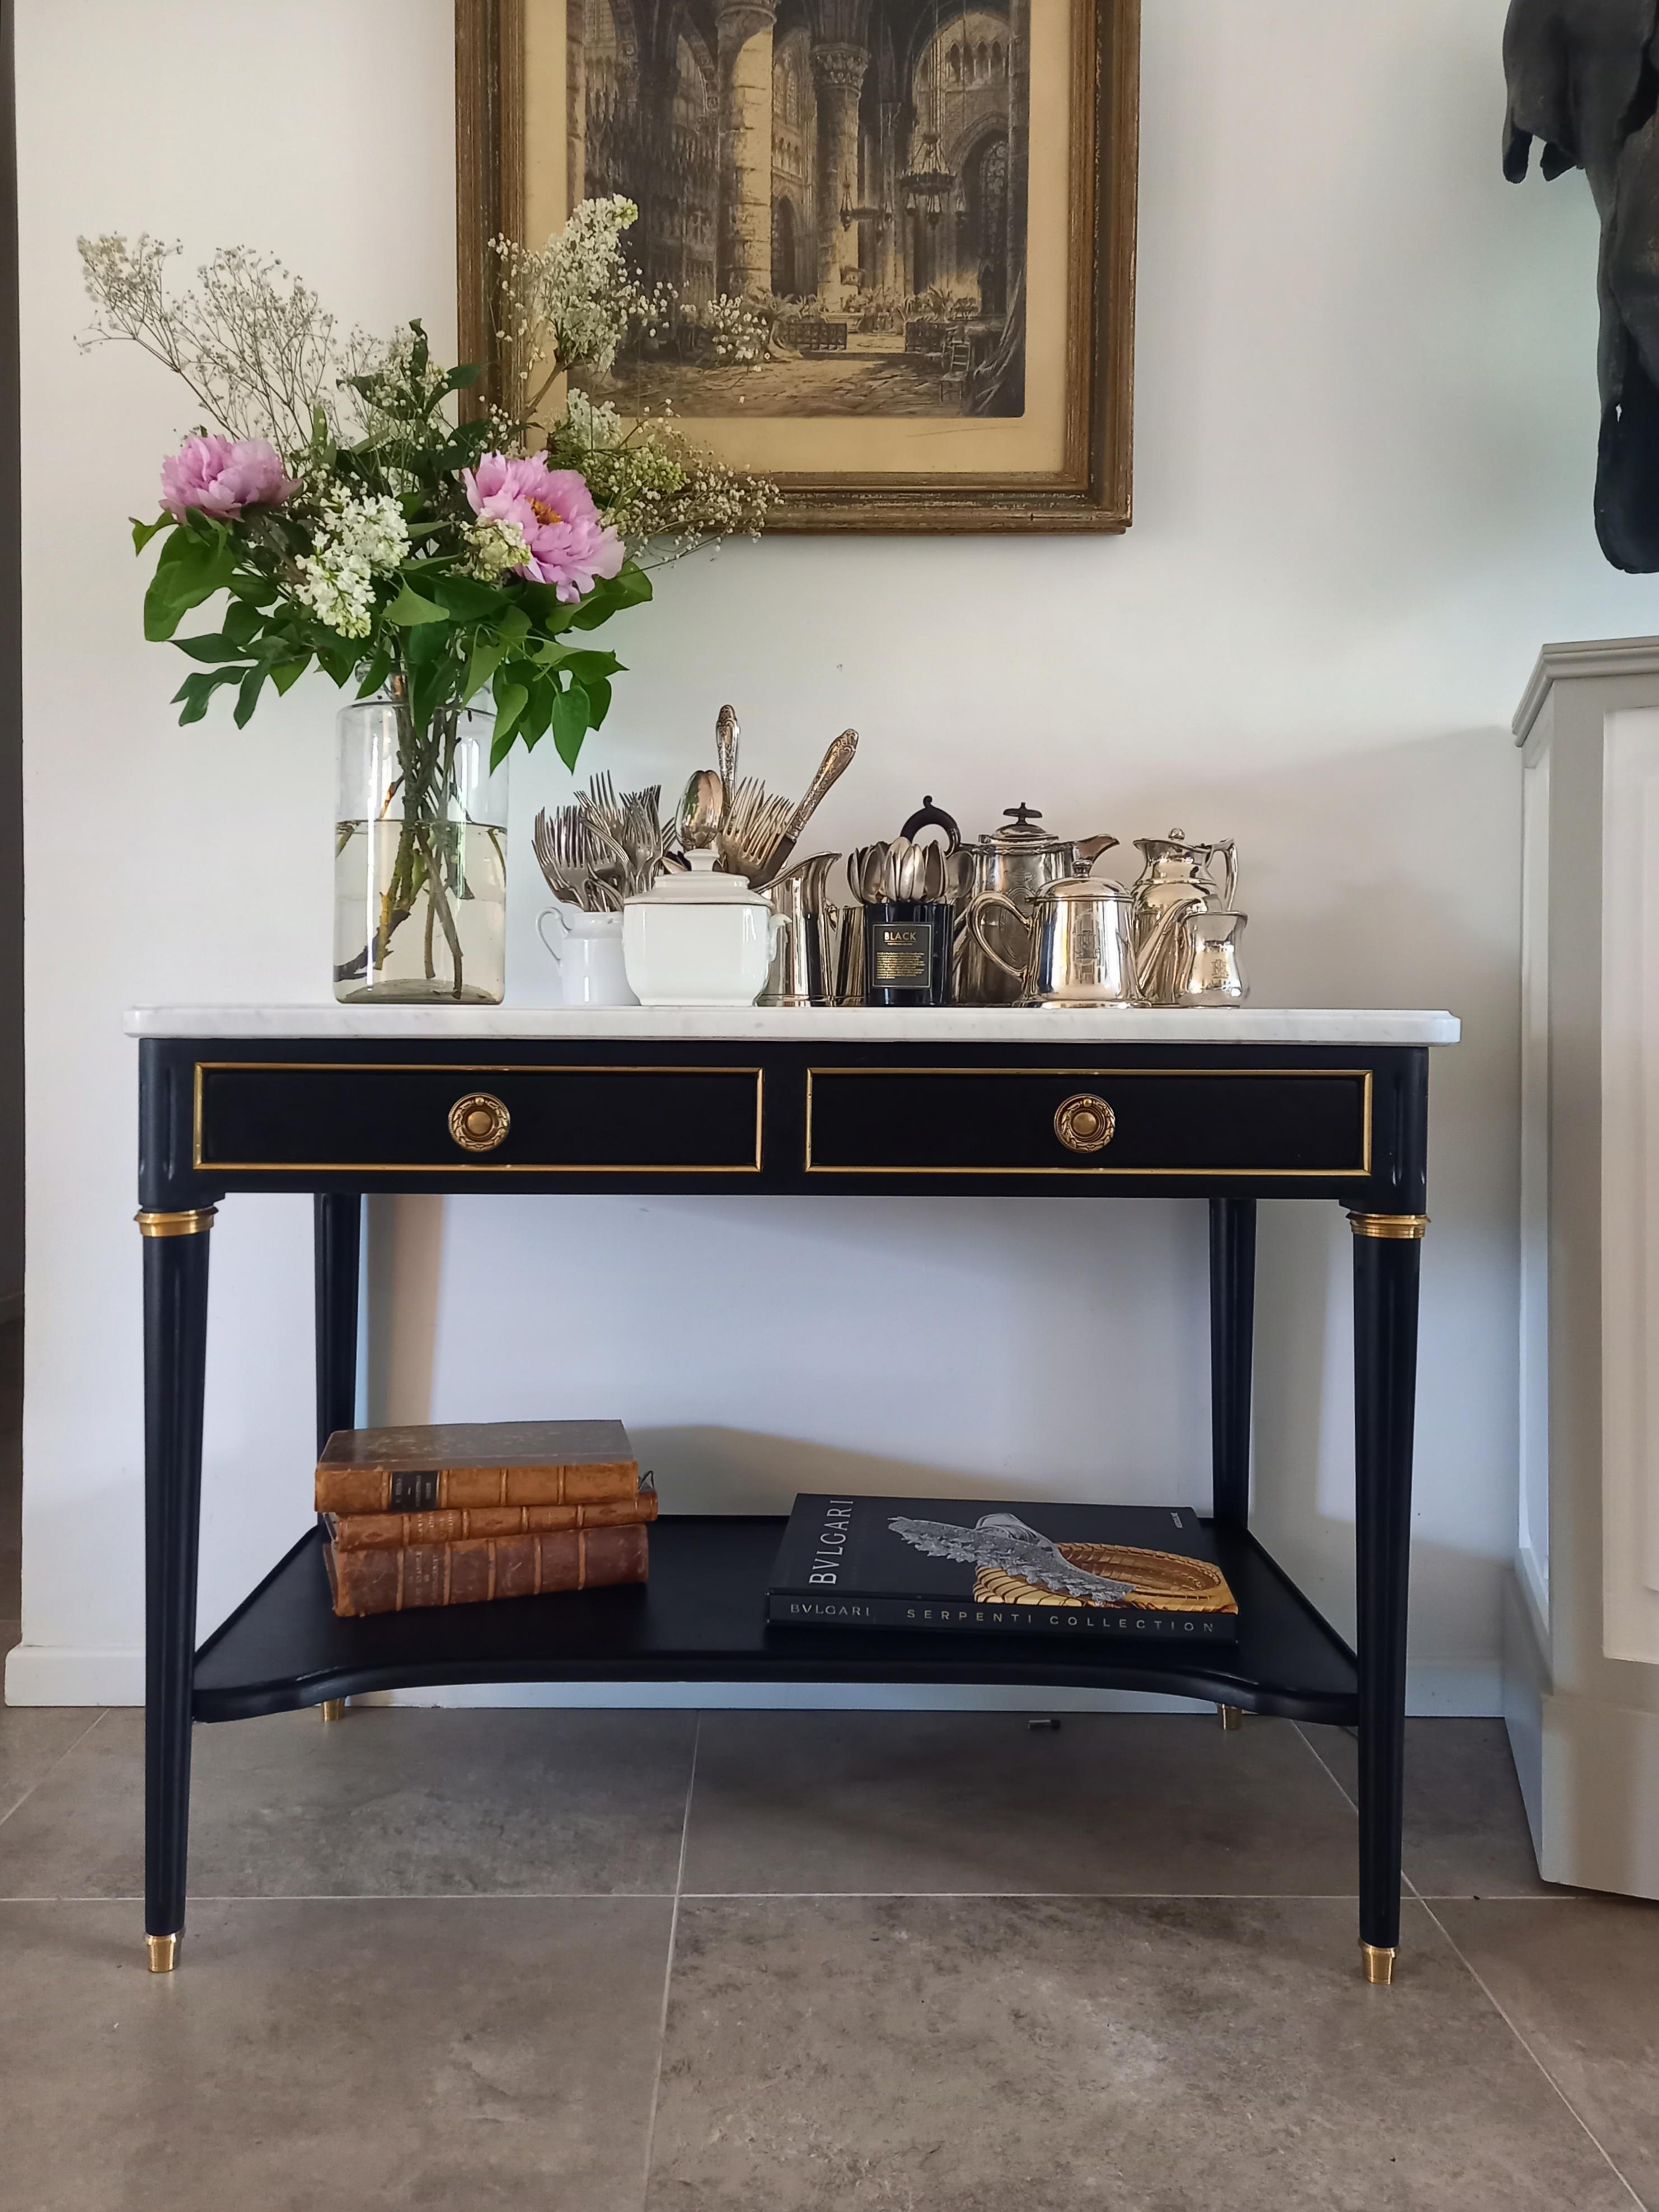 French Louis XVI style console topped with white Carrara marble embellished with a lower wooden shelf.
Two drawers in front, fluted legs elegantly decorated with gilt bronze rings and clogs.

Perfect in a hall, also to create a small whiskey bar